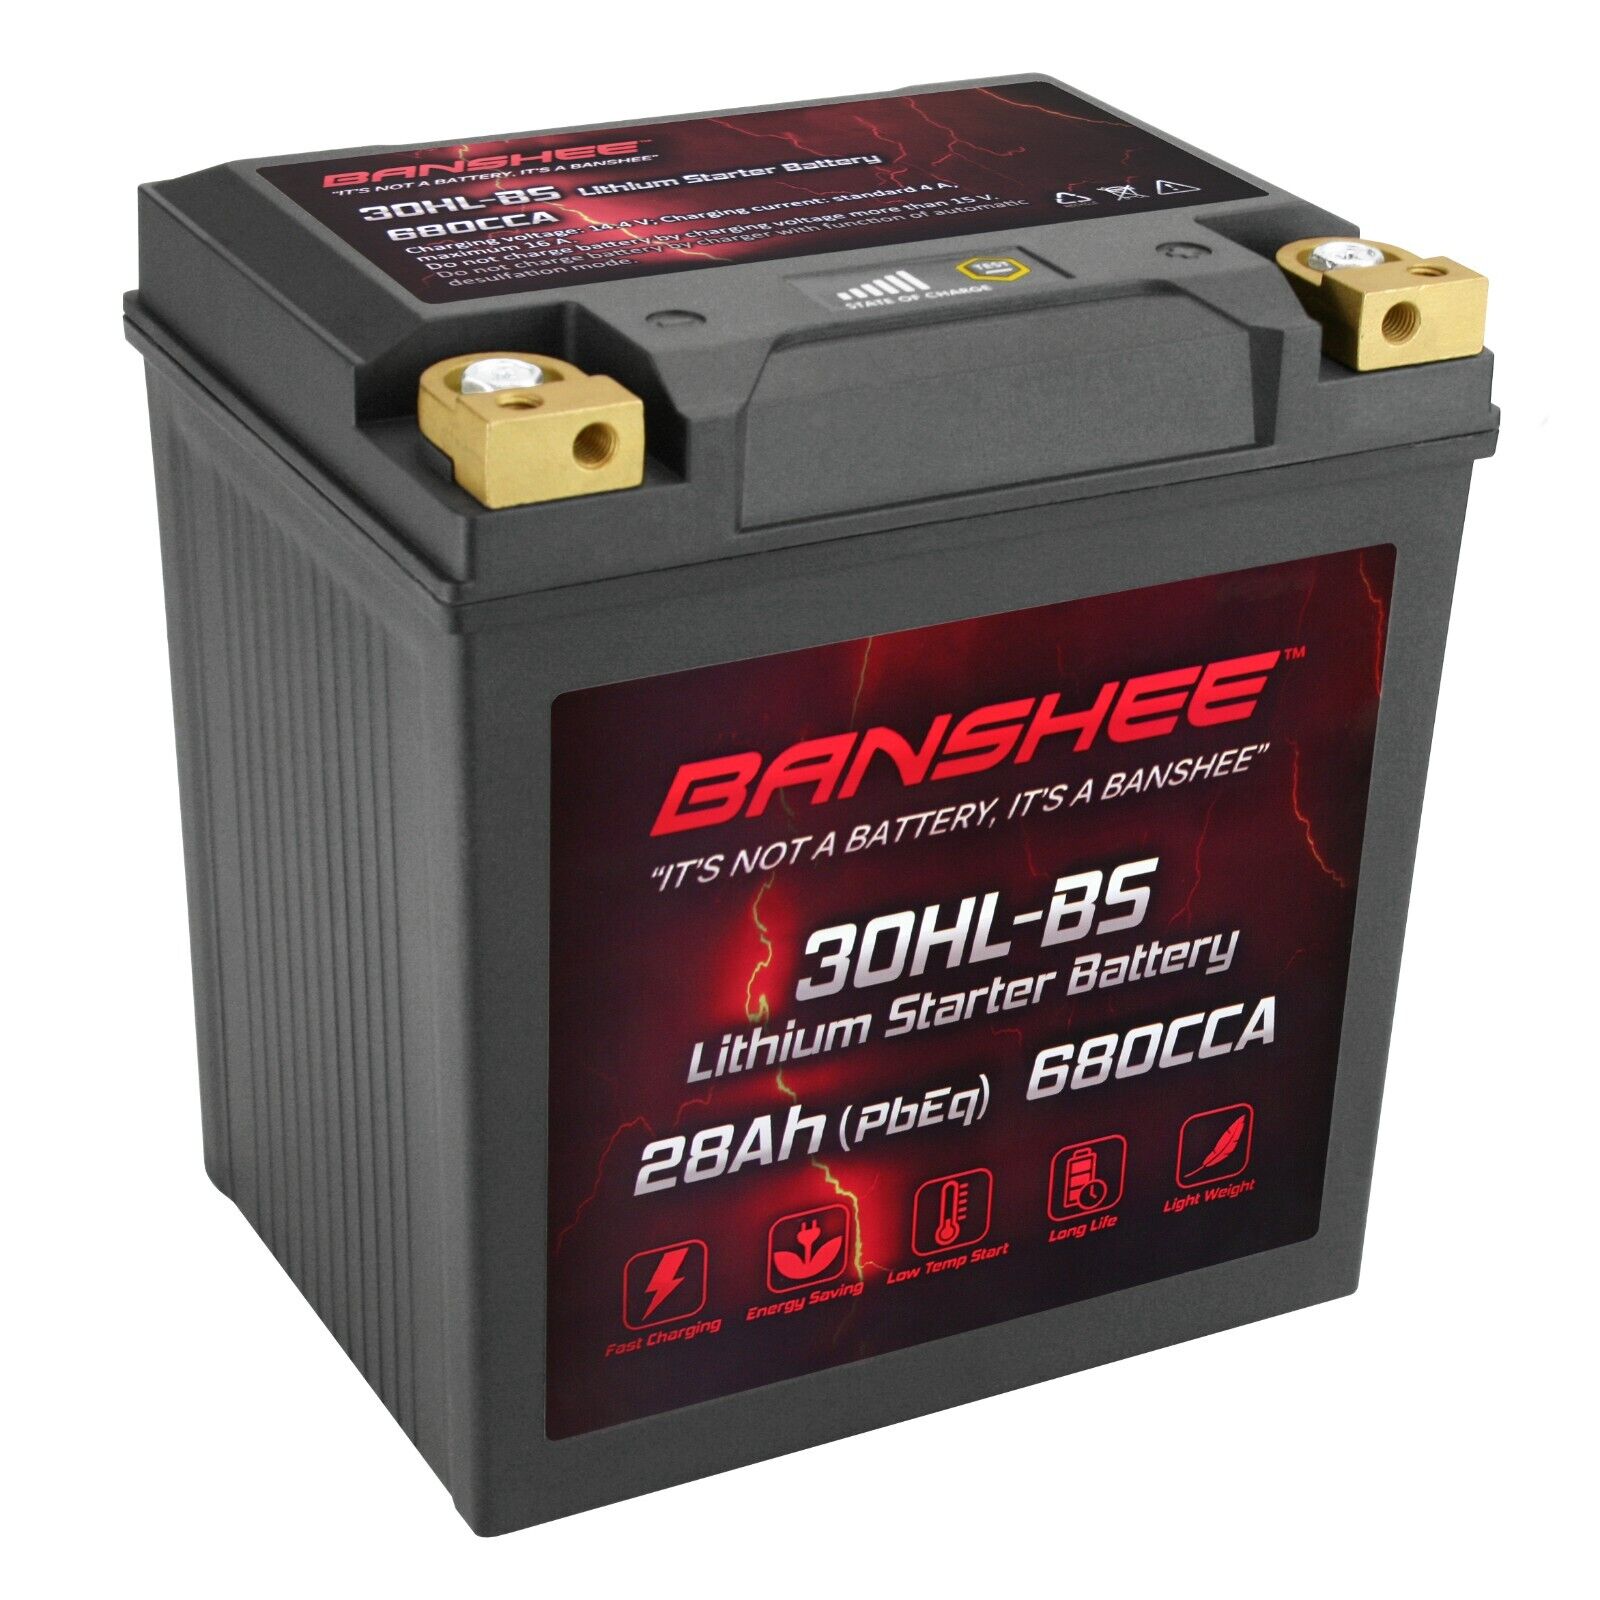 12V 28Ah (PbEq) 680CCA LiFePO4 Lithium Motorcycle Battery, Replaces YTX30L-BS